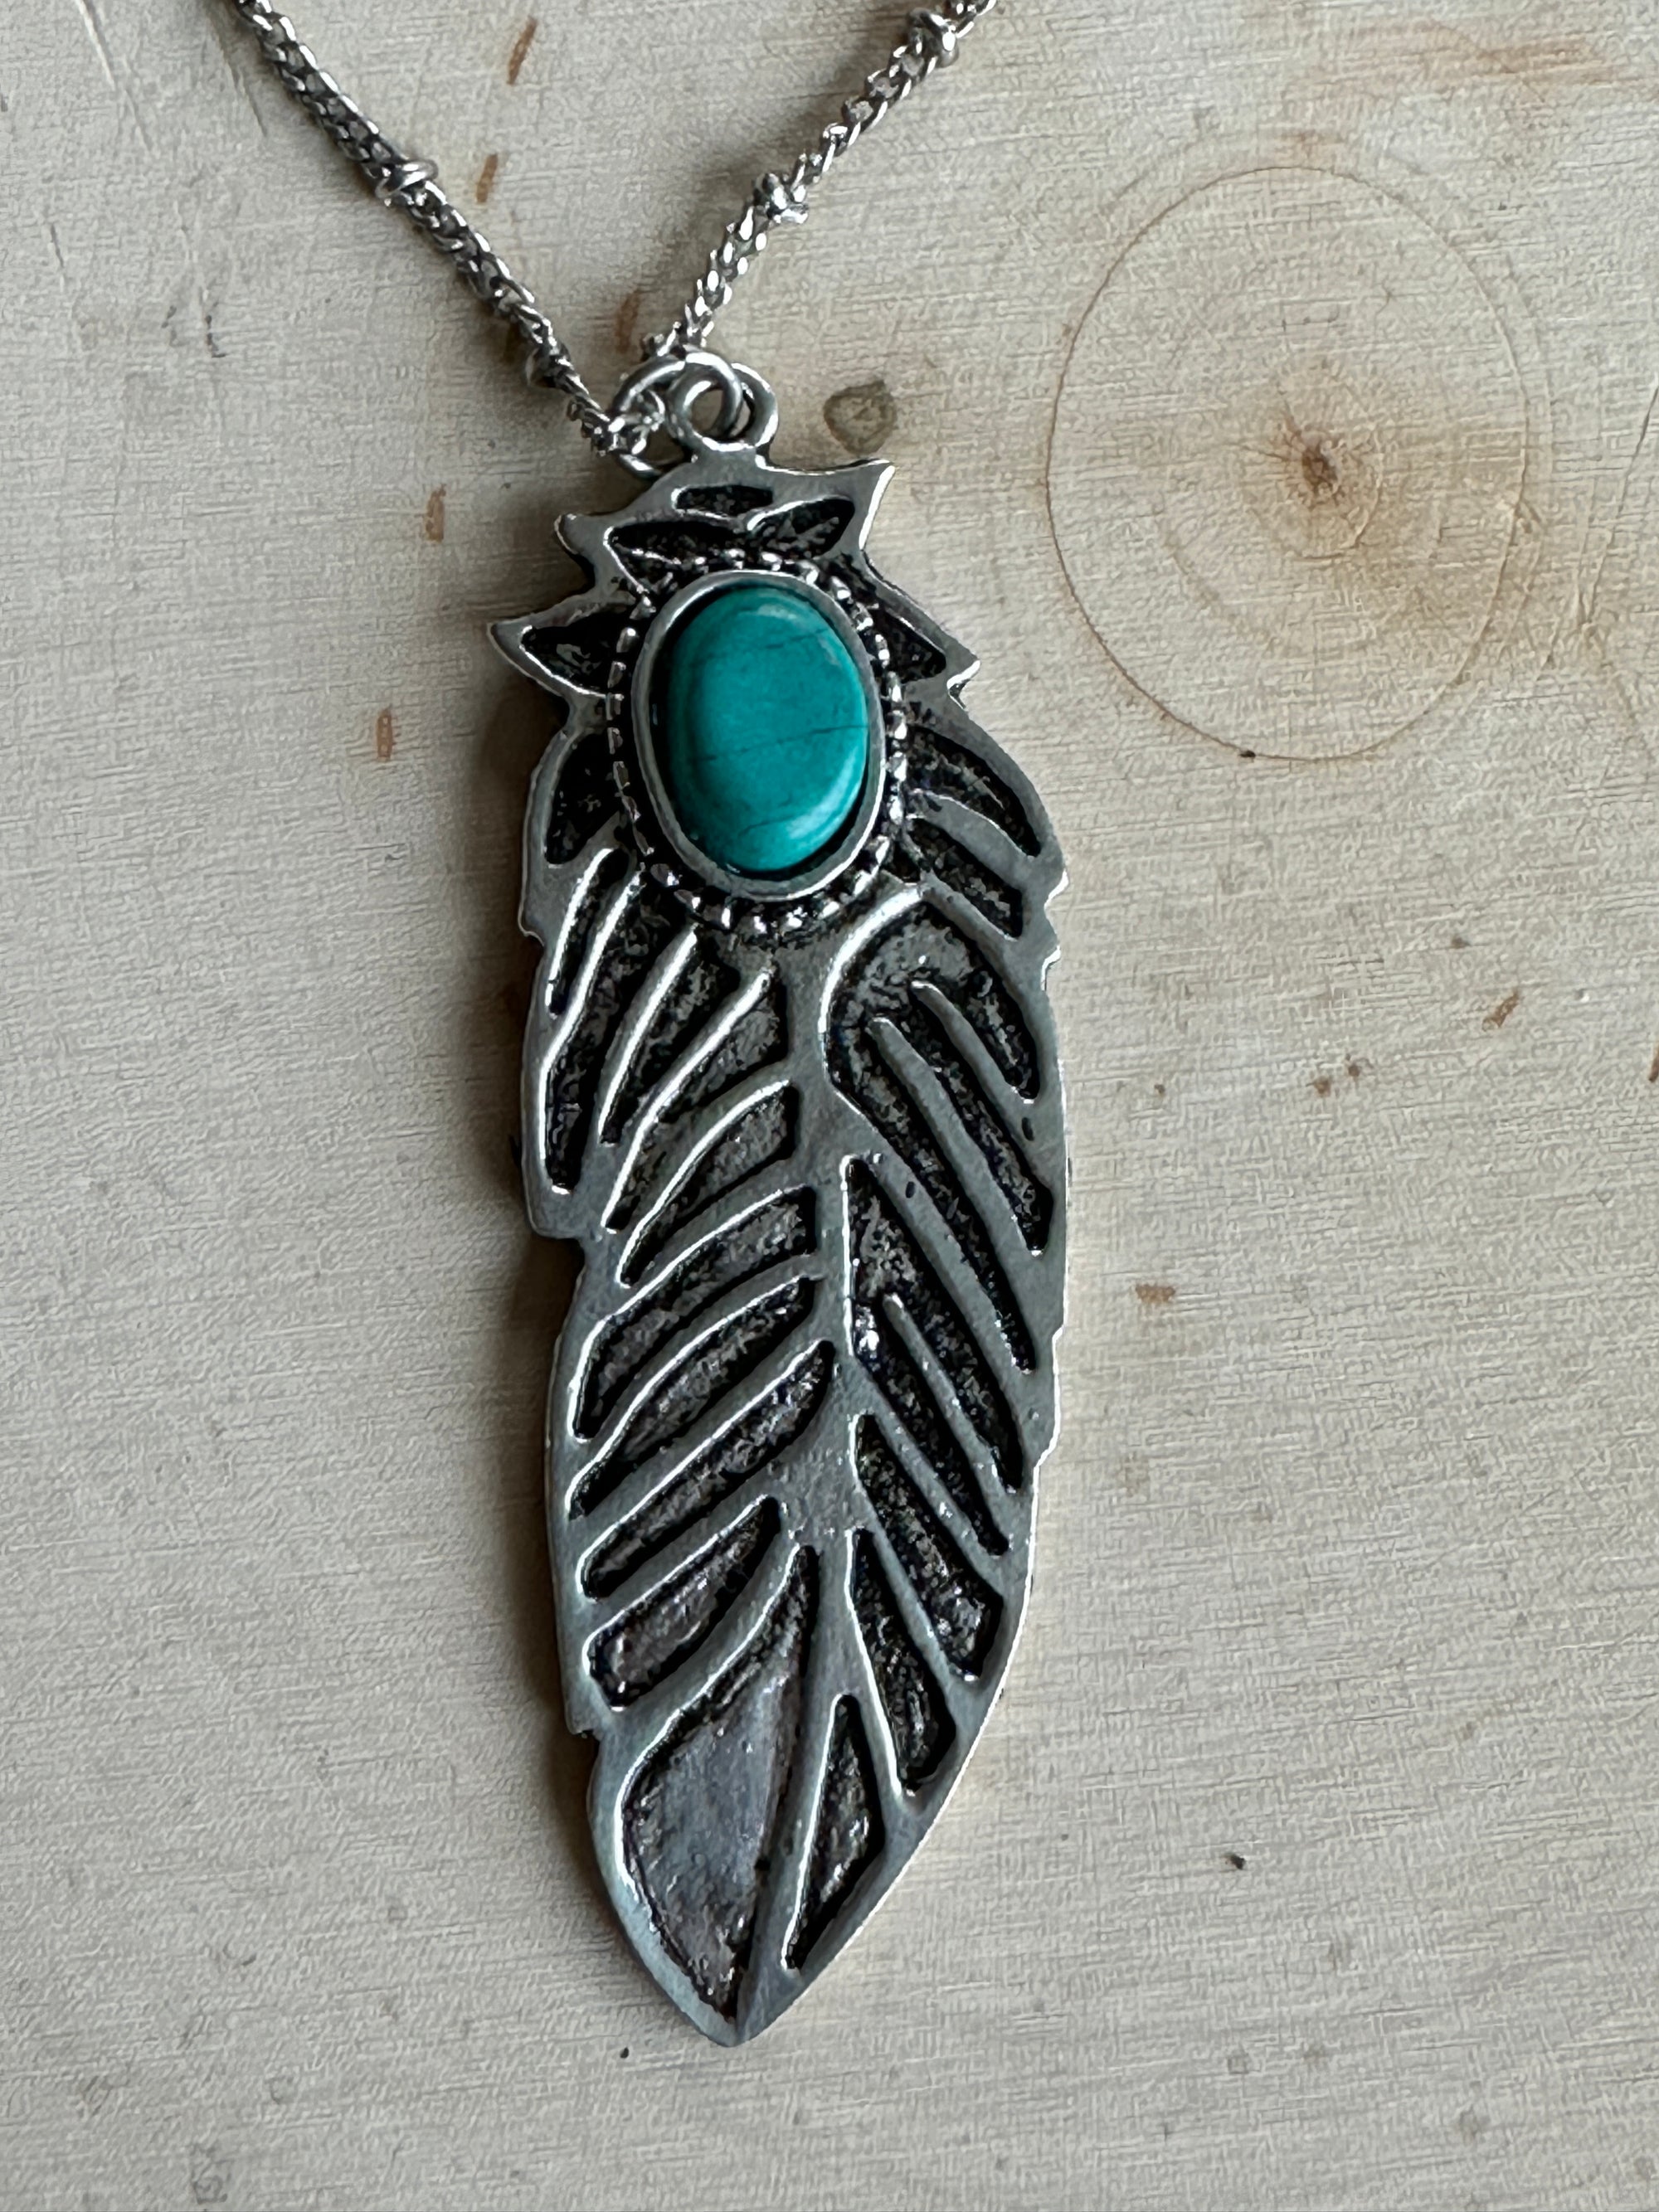 Silver/Turq Feather Necklace